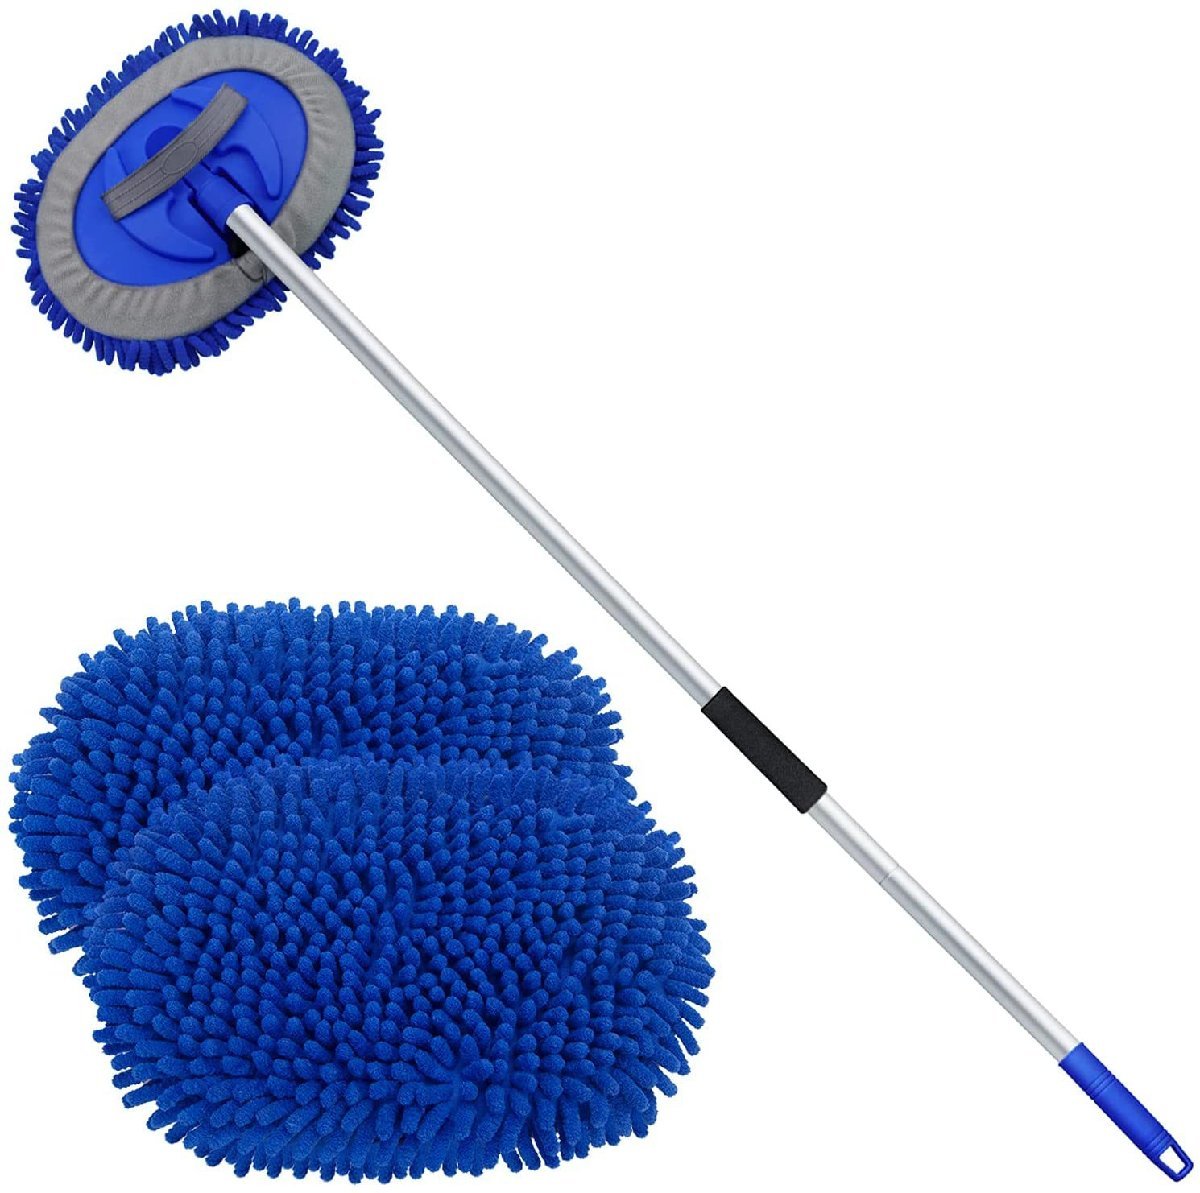  mop head 2 sheets mop two in one car wash brush sponge glove flexible type cleaning removed possibility SUV RV automobile bus length 160cm*